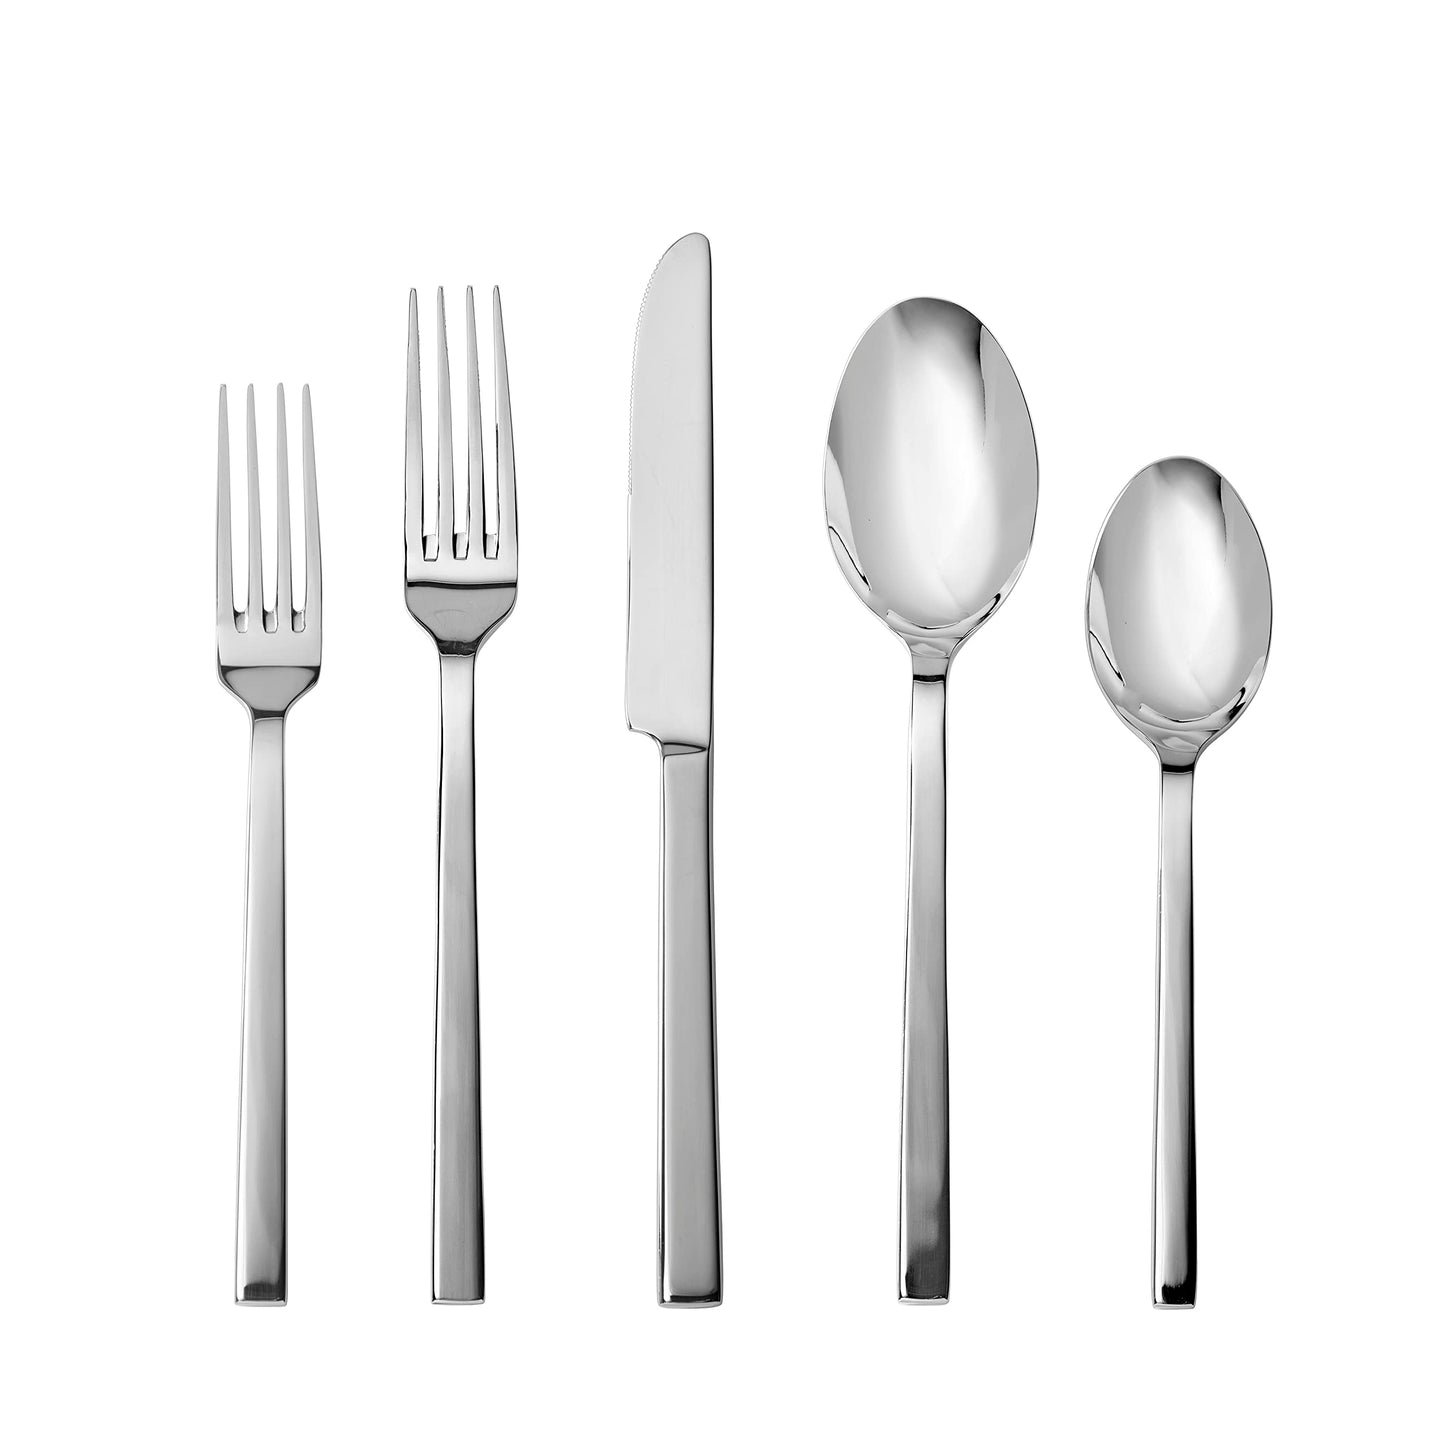 Fortessa Viggo Stainless Steel Flatware, Mirrored Stainless Steel, 18 Piece Place Setting, Service for 4